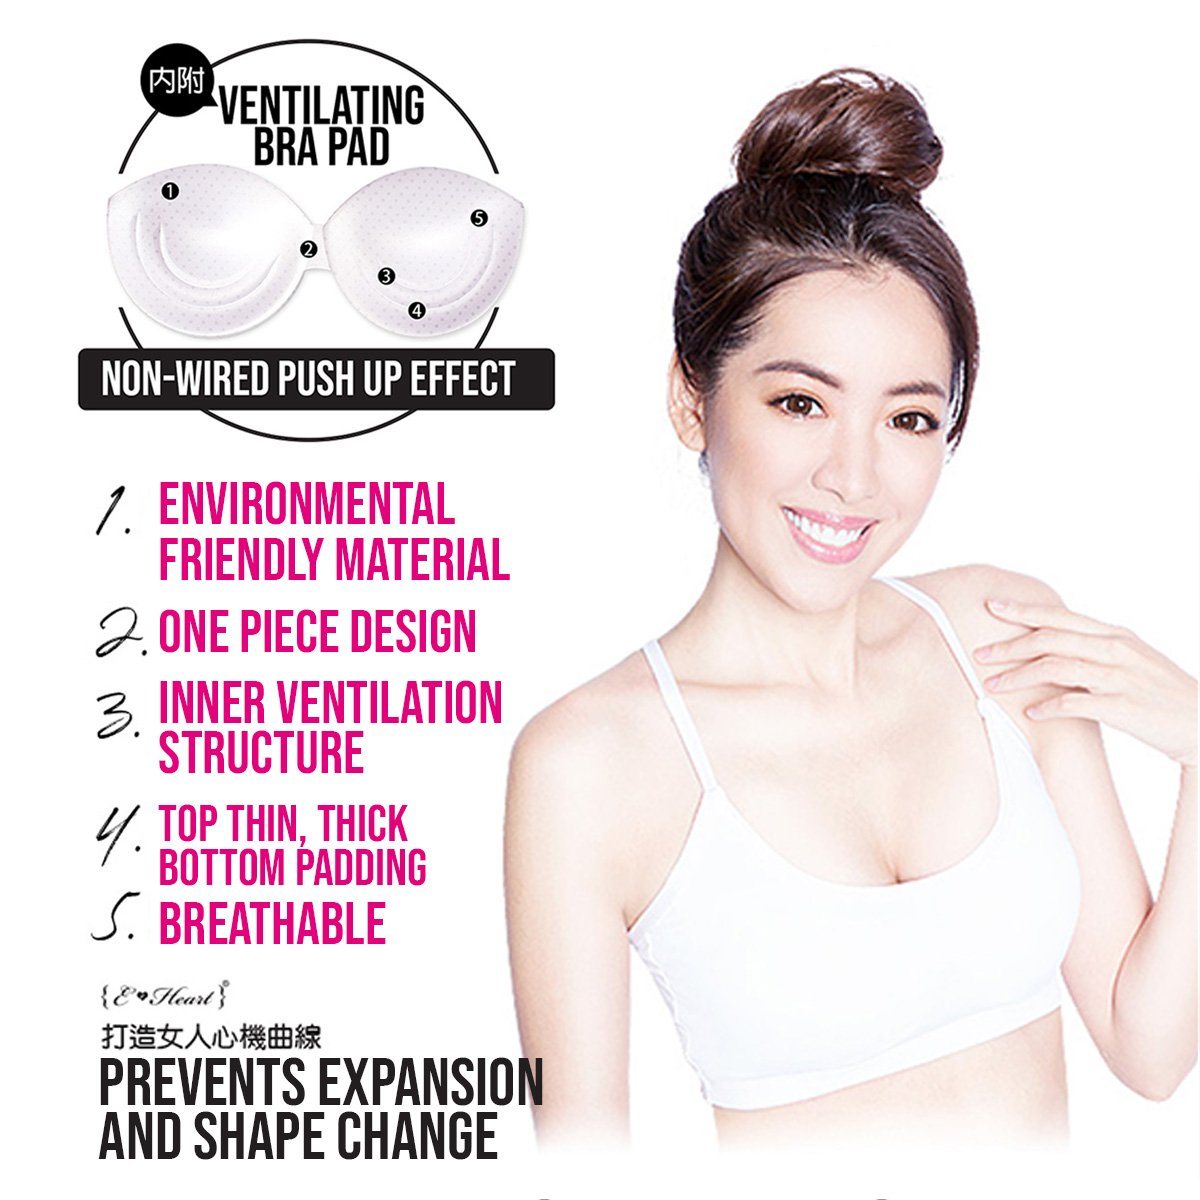 ($14.90 Only) Eheart Non-wired V-line Push-up Beauty Bra (Cross Back Design) - Bloom Concept